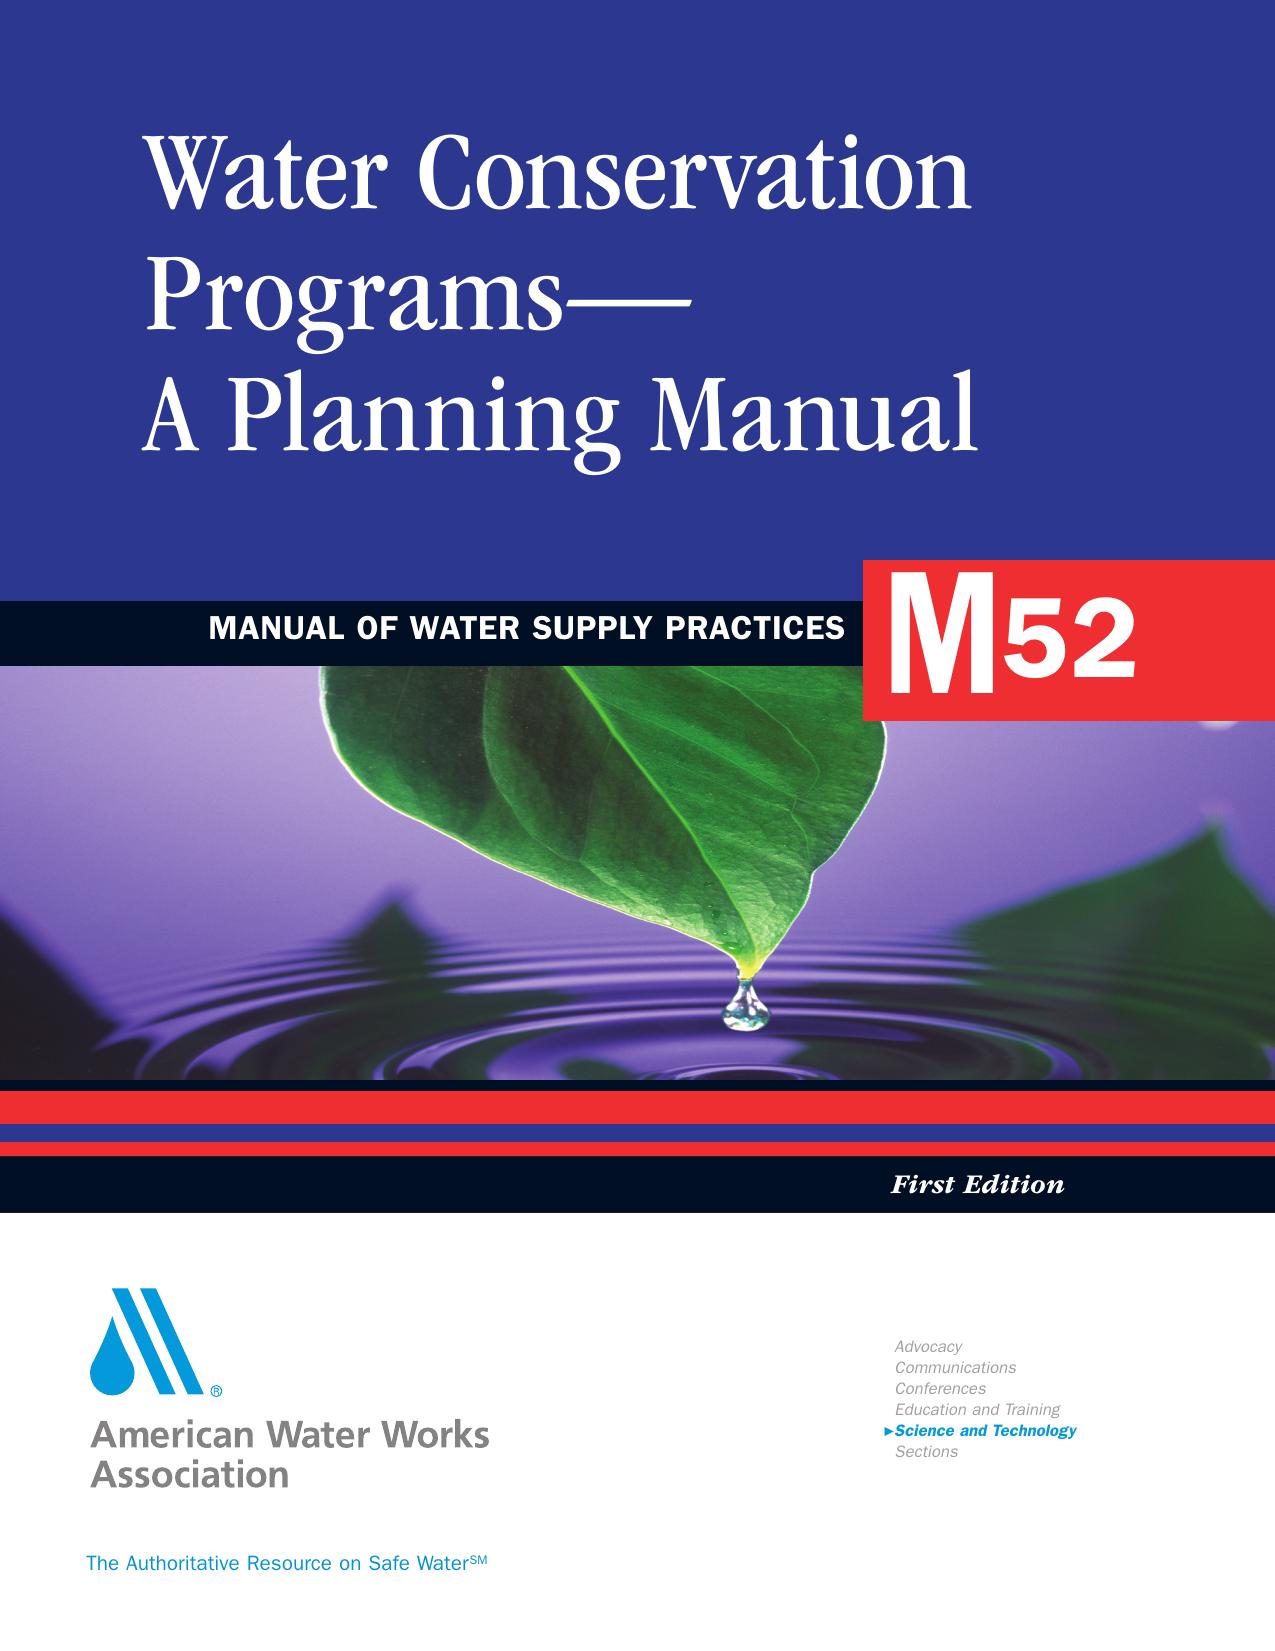 AWWA Manual, Volume 52 : Water Conservation Programs : A Planning Manual